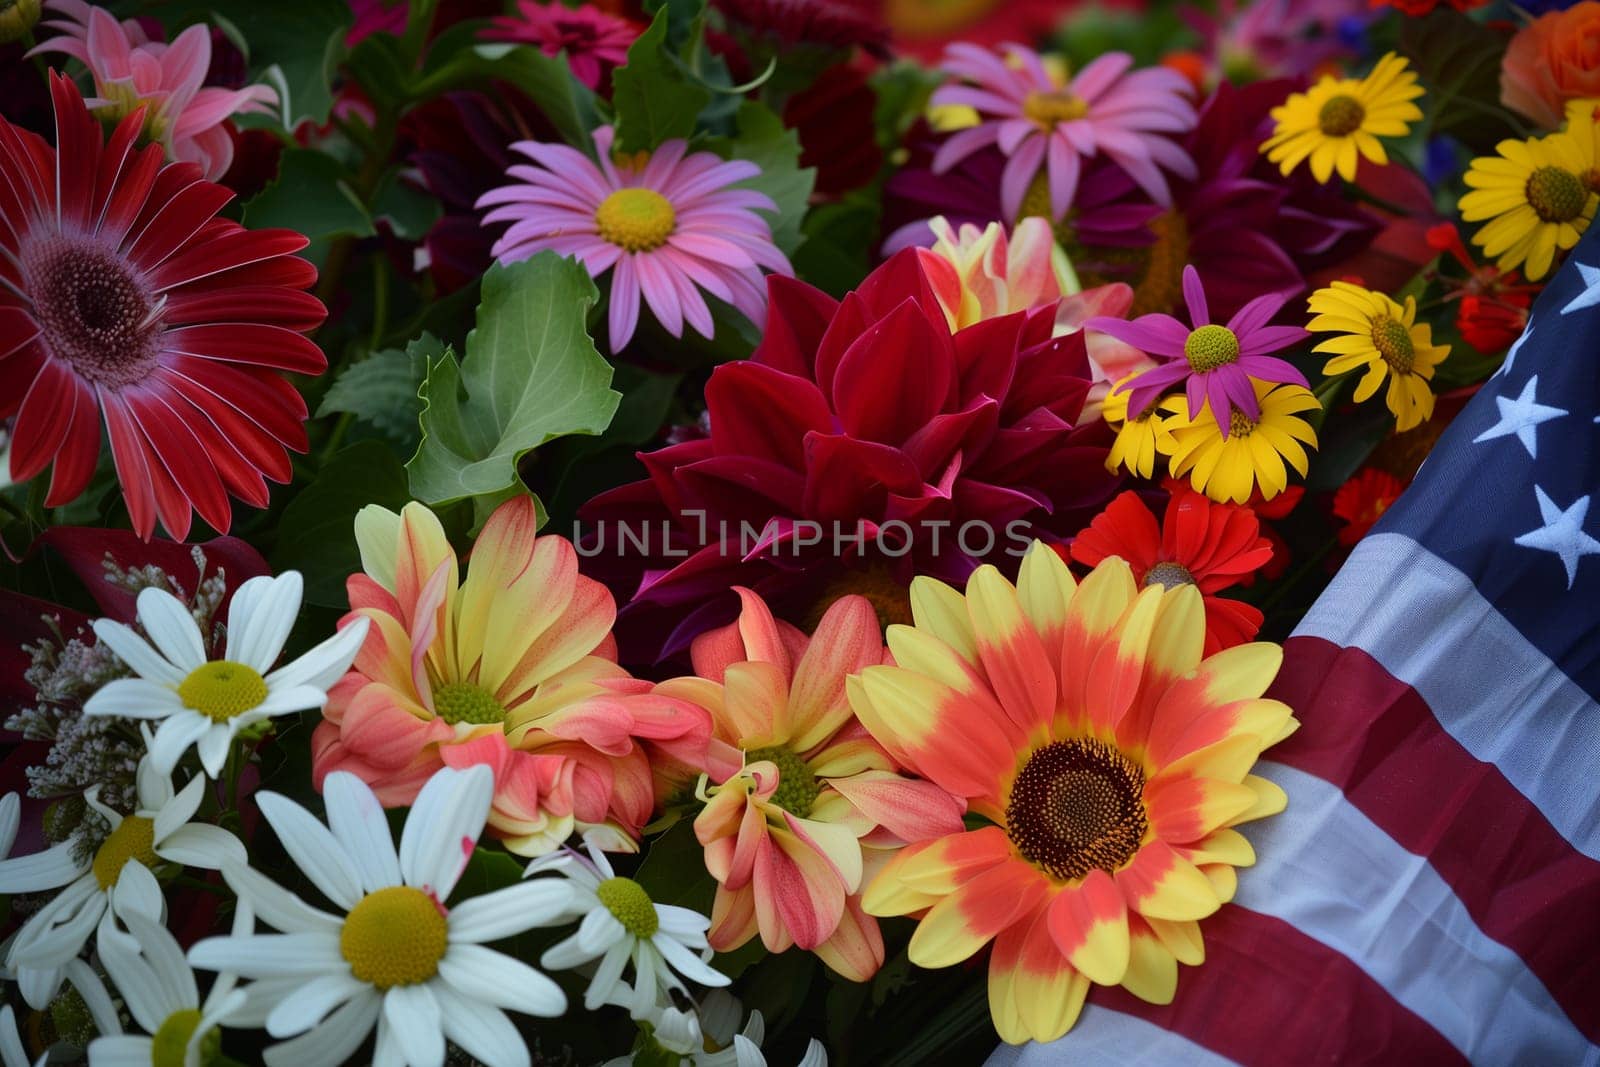 A bunch of colorful flowers with an American flag in the background, symbolizing patriotism and national pride on Flag Day USA.